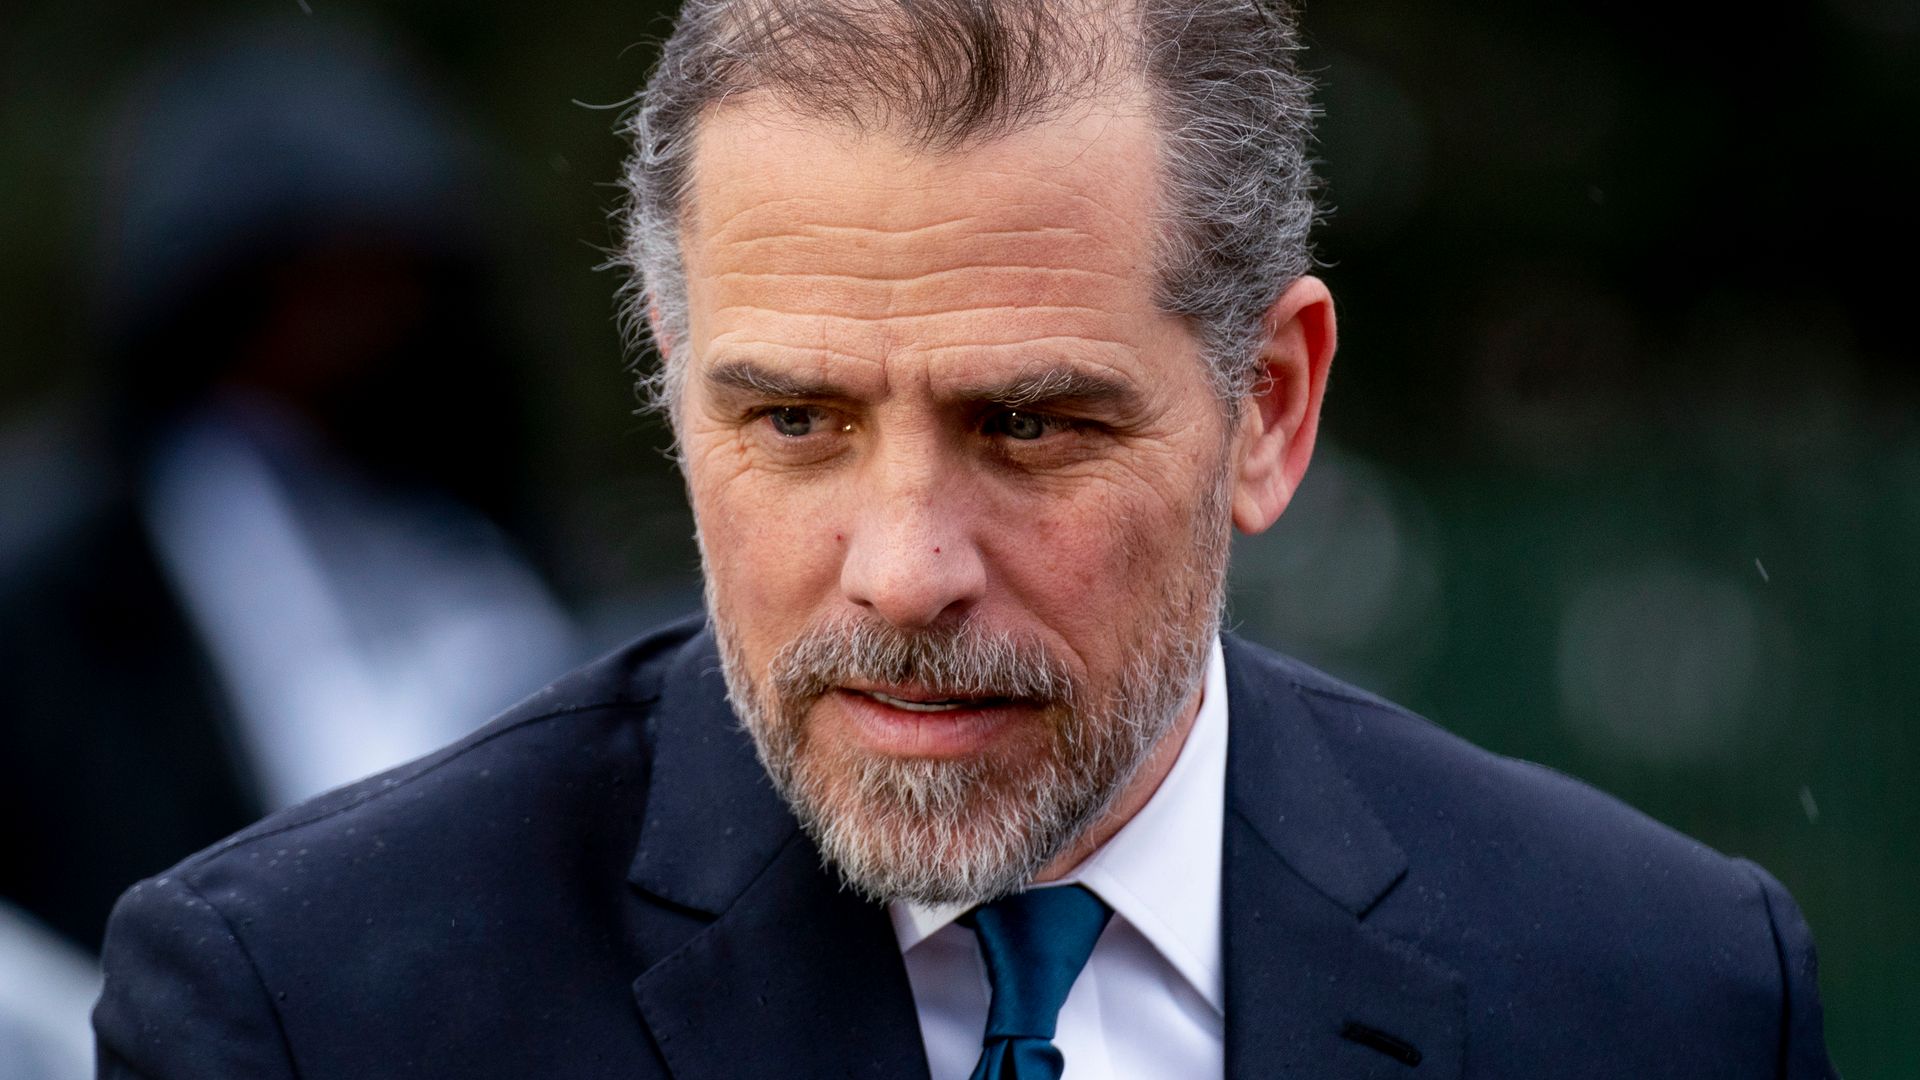 To keep out of jail, Hunter Biden will plead guilty to two tax misdemeanors and admit to the facts of a felony gun charge.